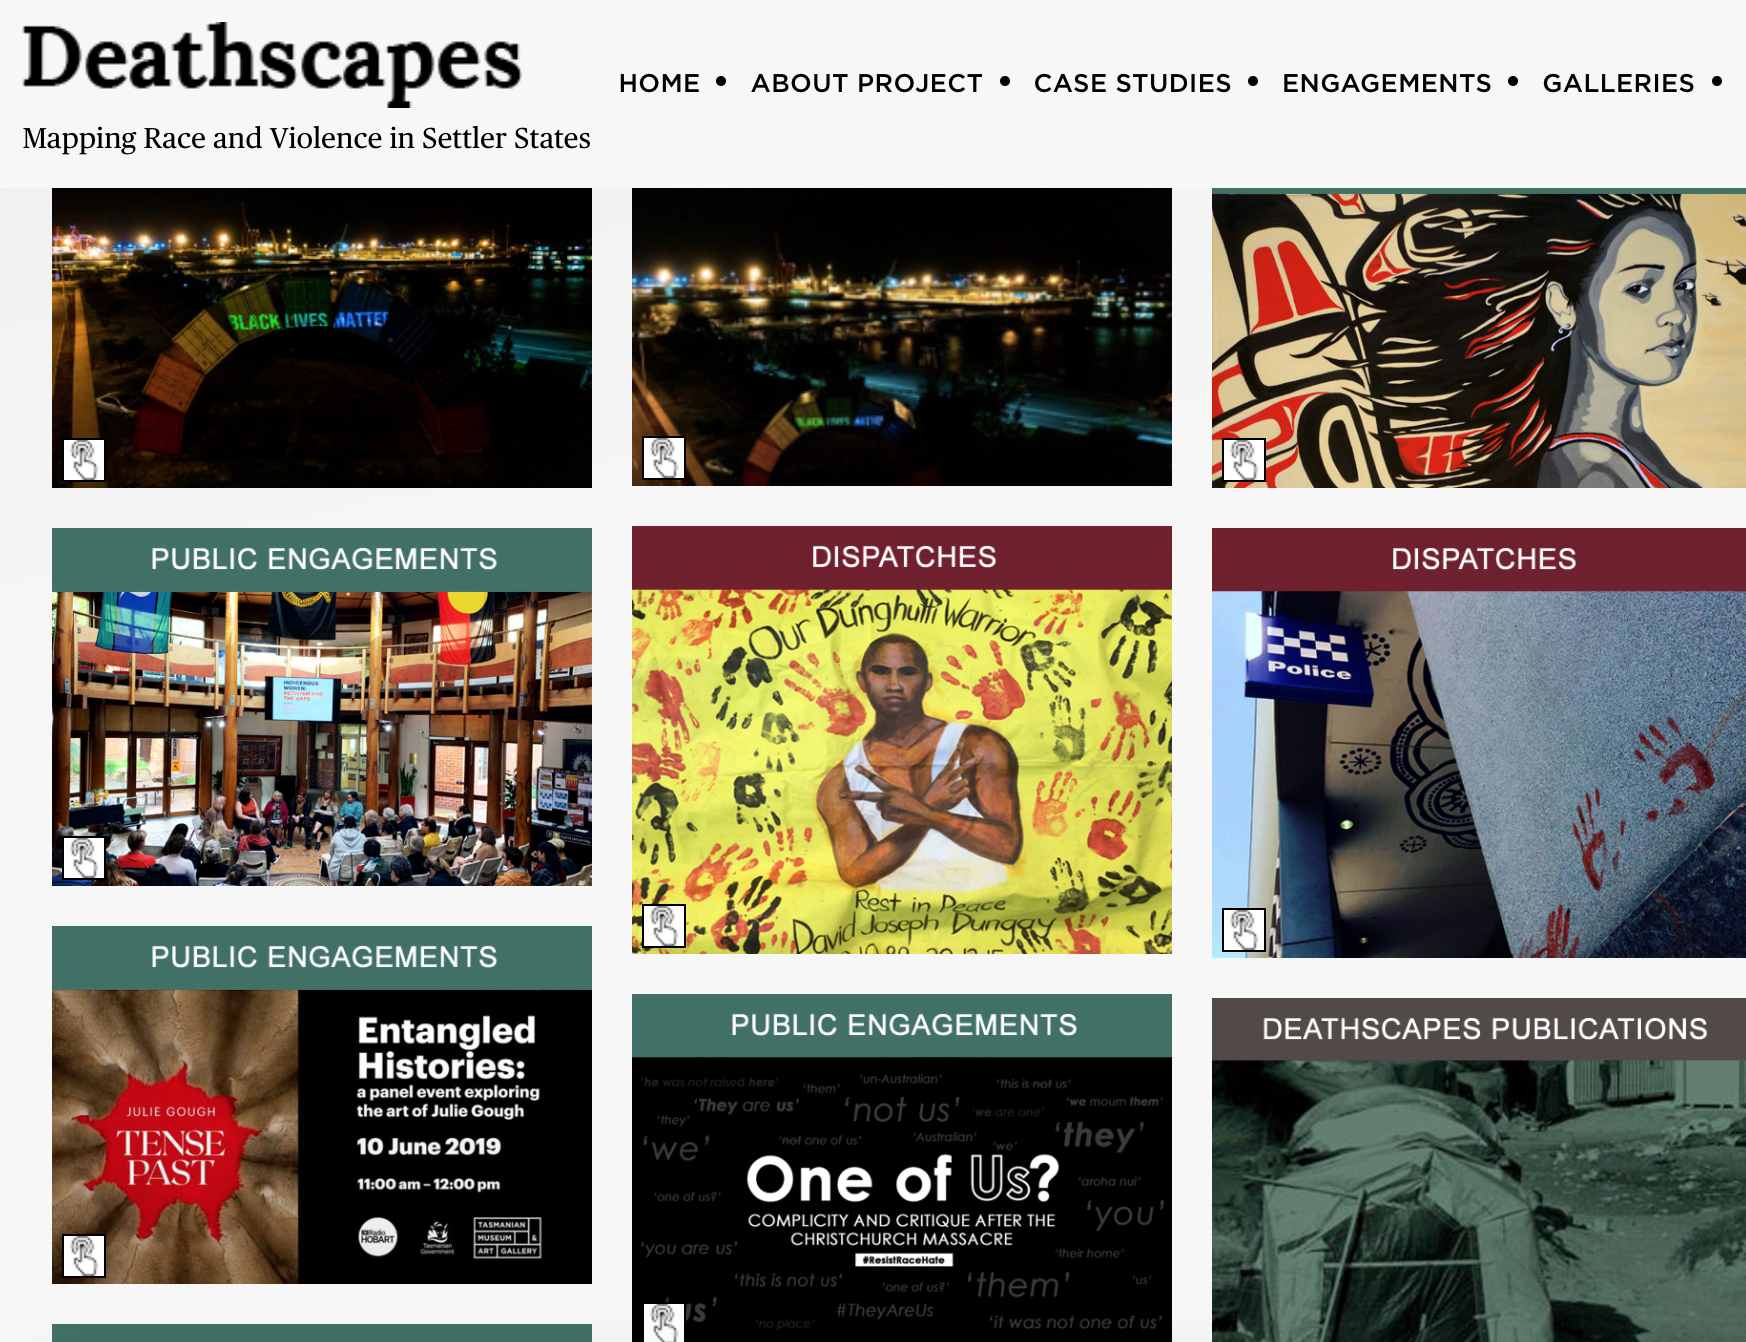 The Deathscapes project website